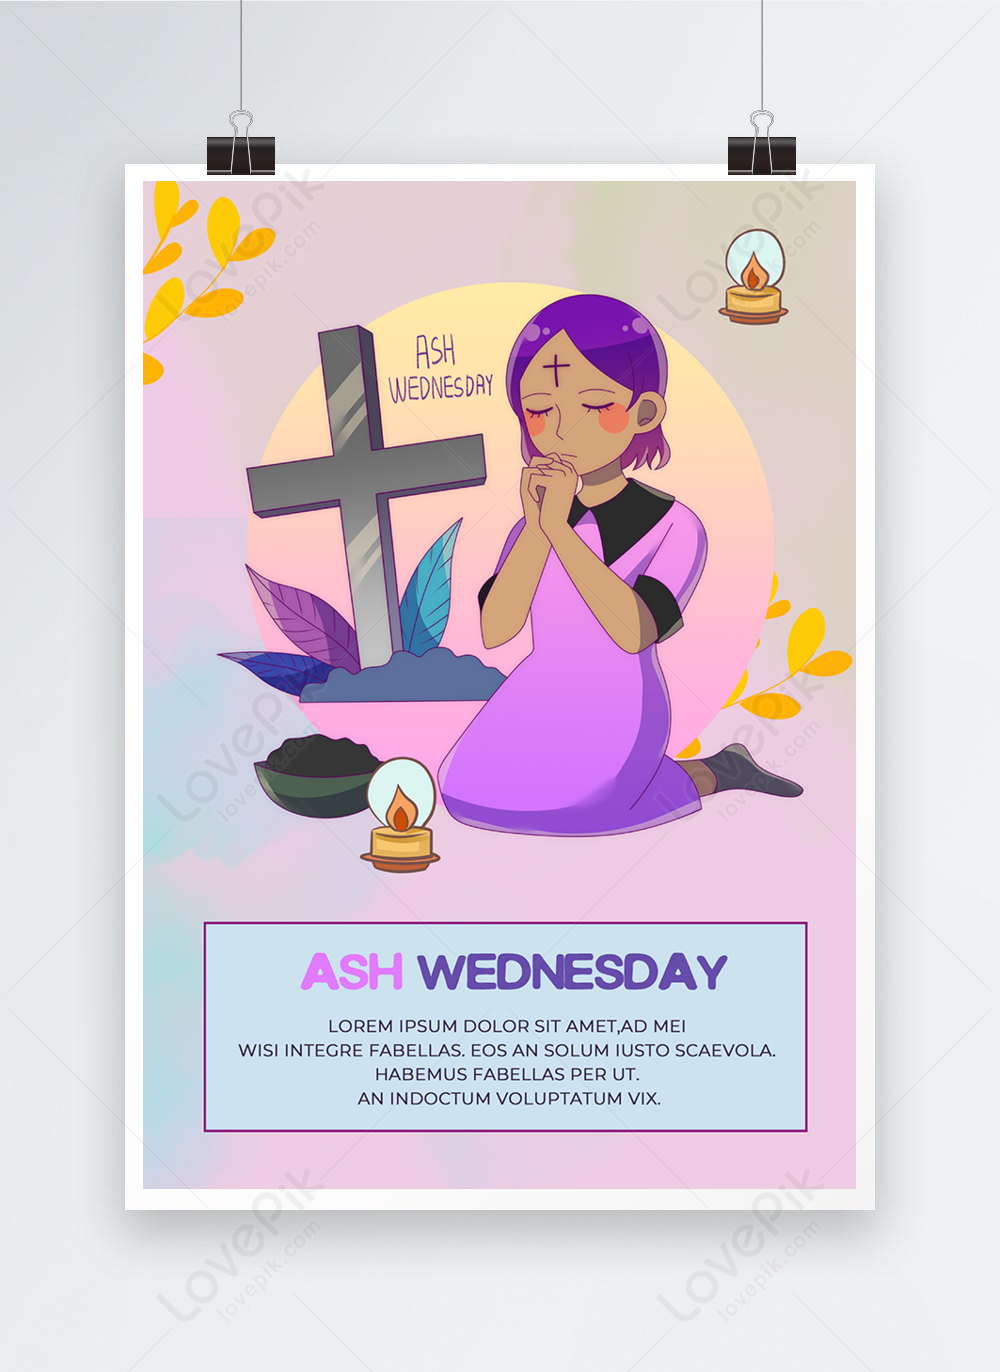 Miercoles De Ceniza - Ash Wednesday Spanish Text - Christian Tradition  Stock Vector - Illustration of humility, label: 108682699